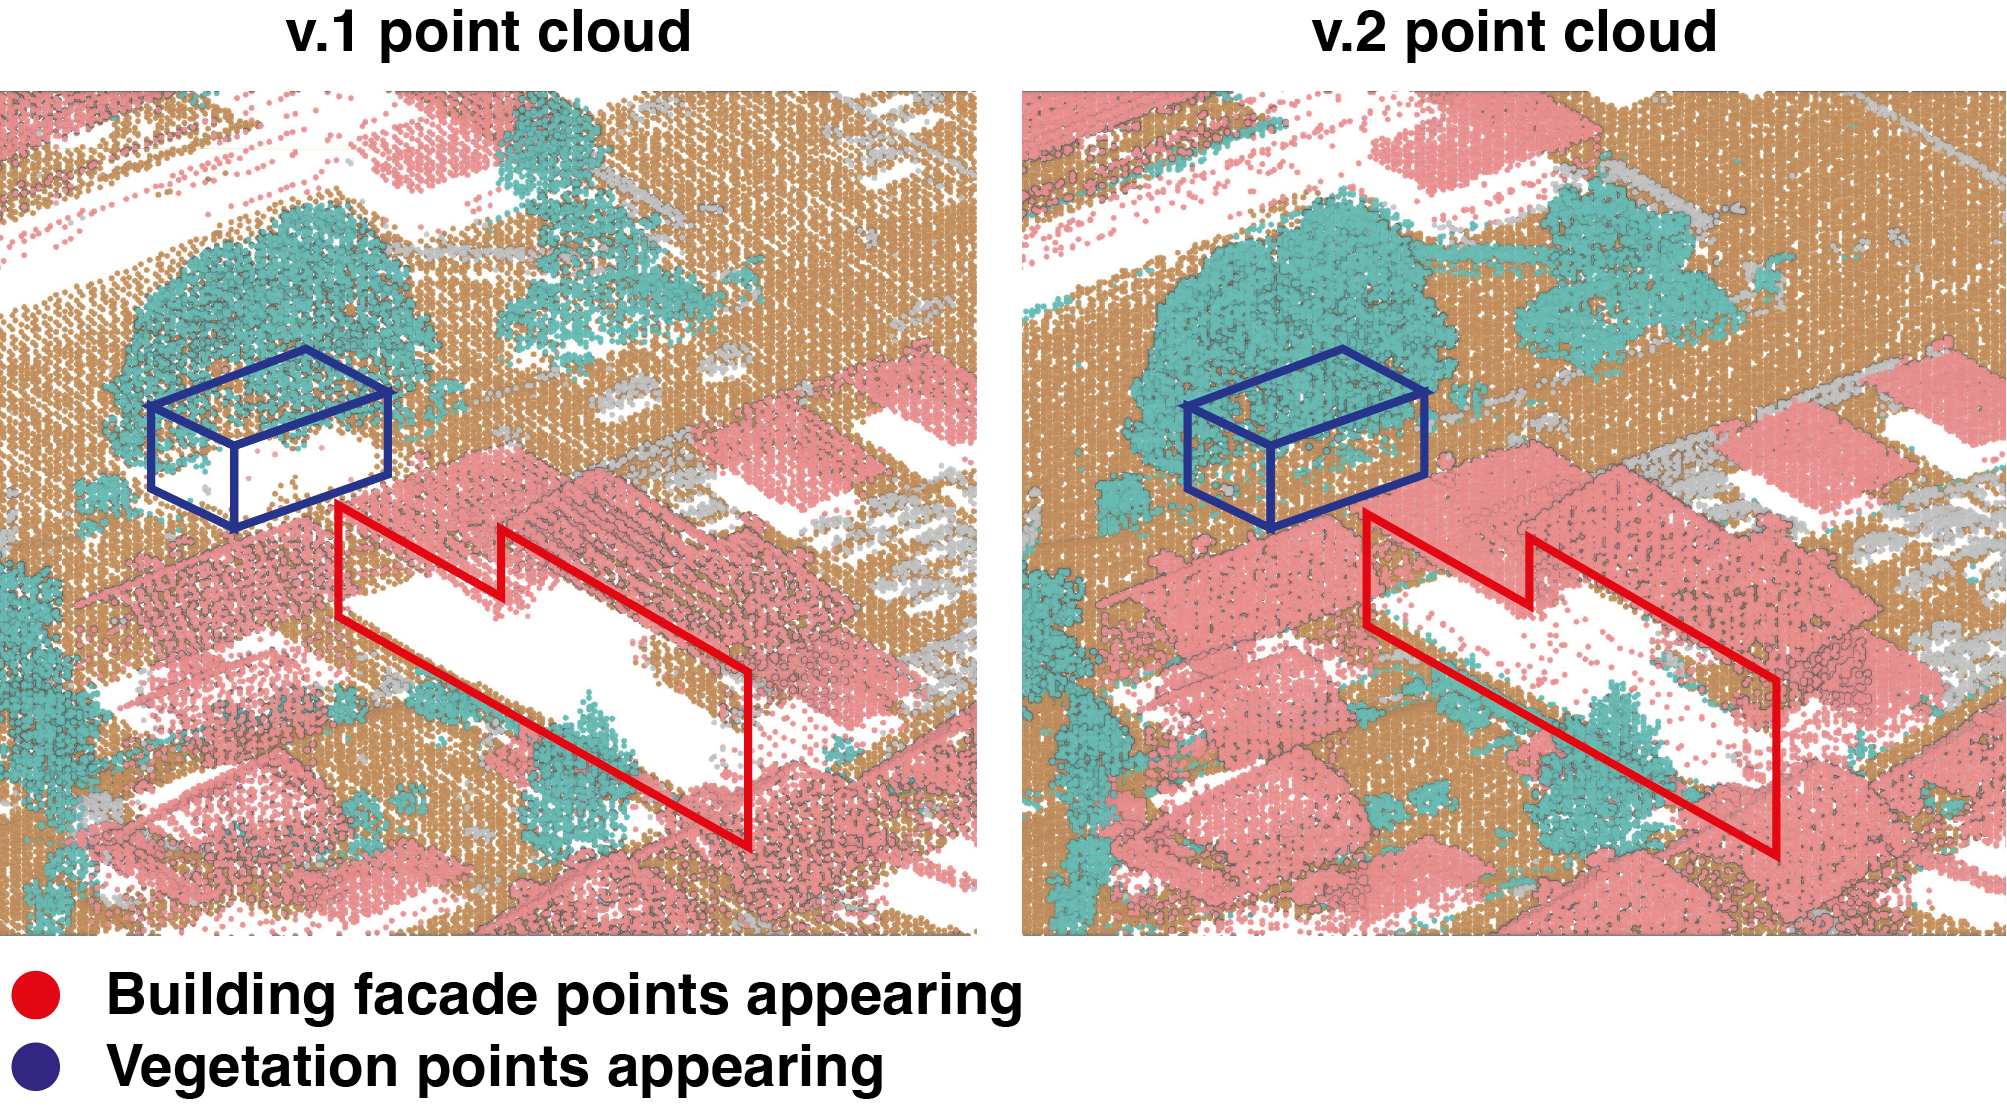 non-problematic appearance of points in the v.2 point cloud due to the difference of density between the two generations.